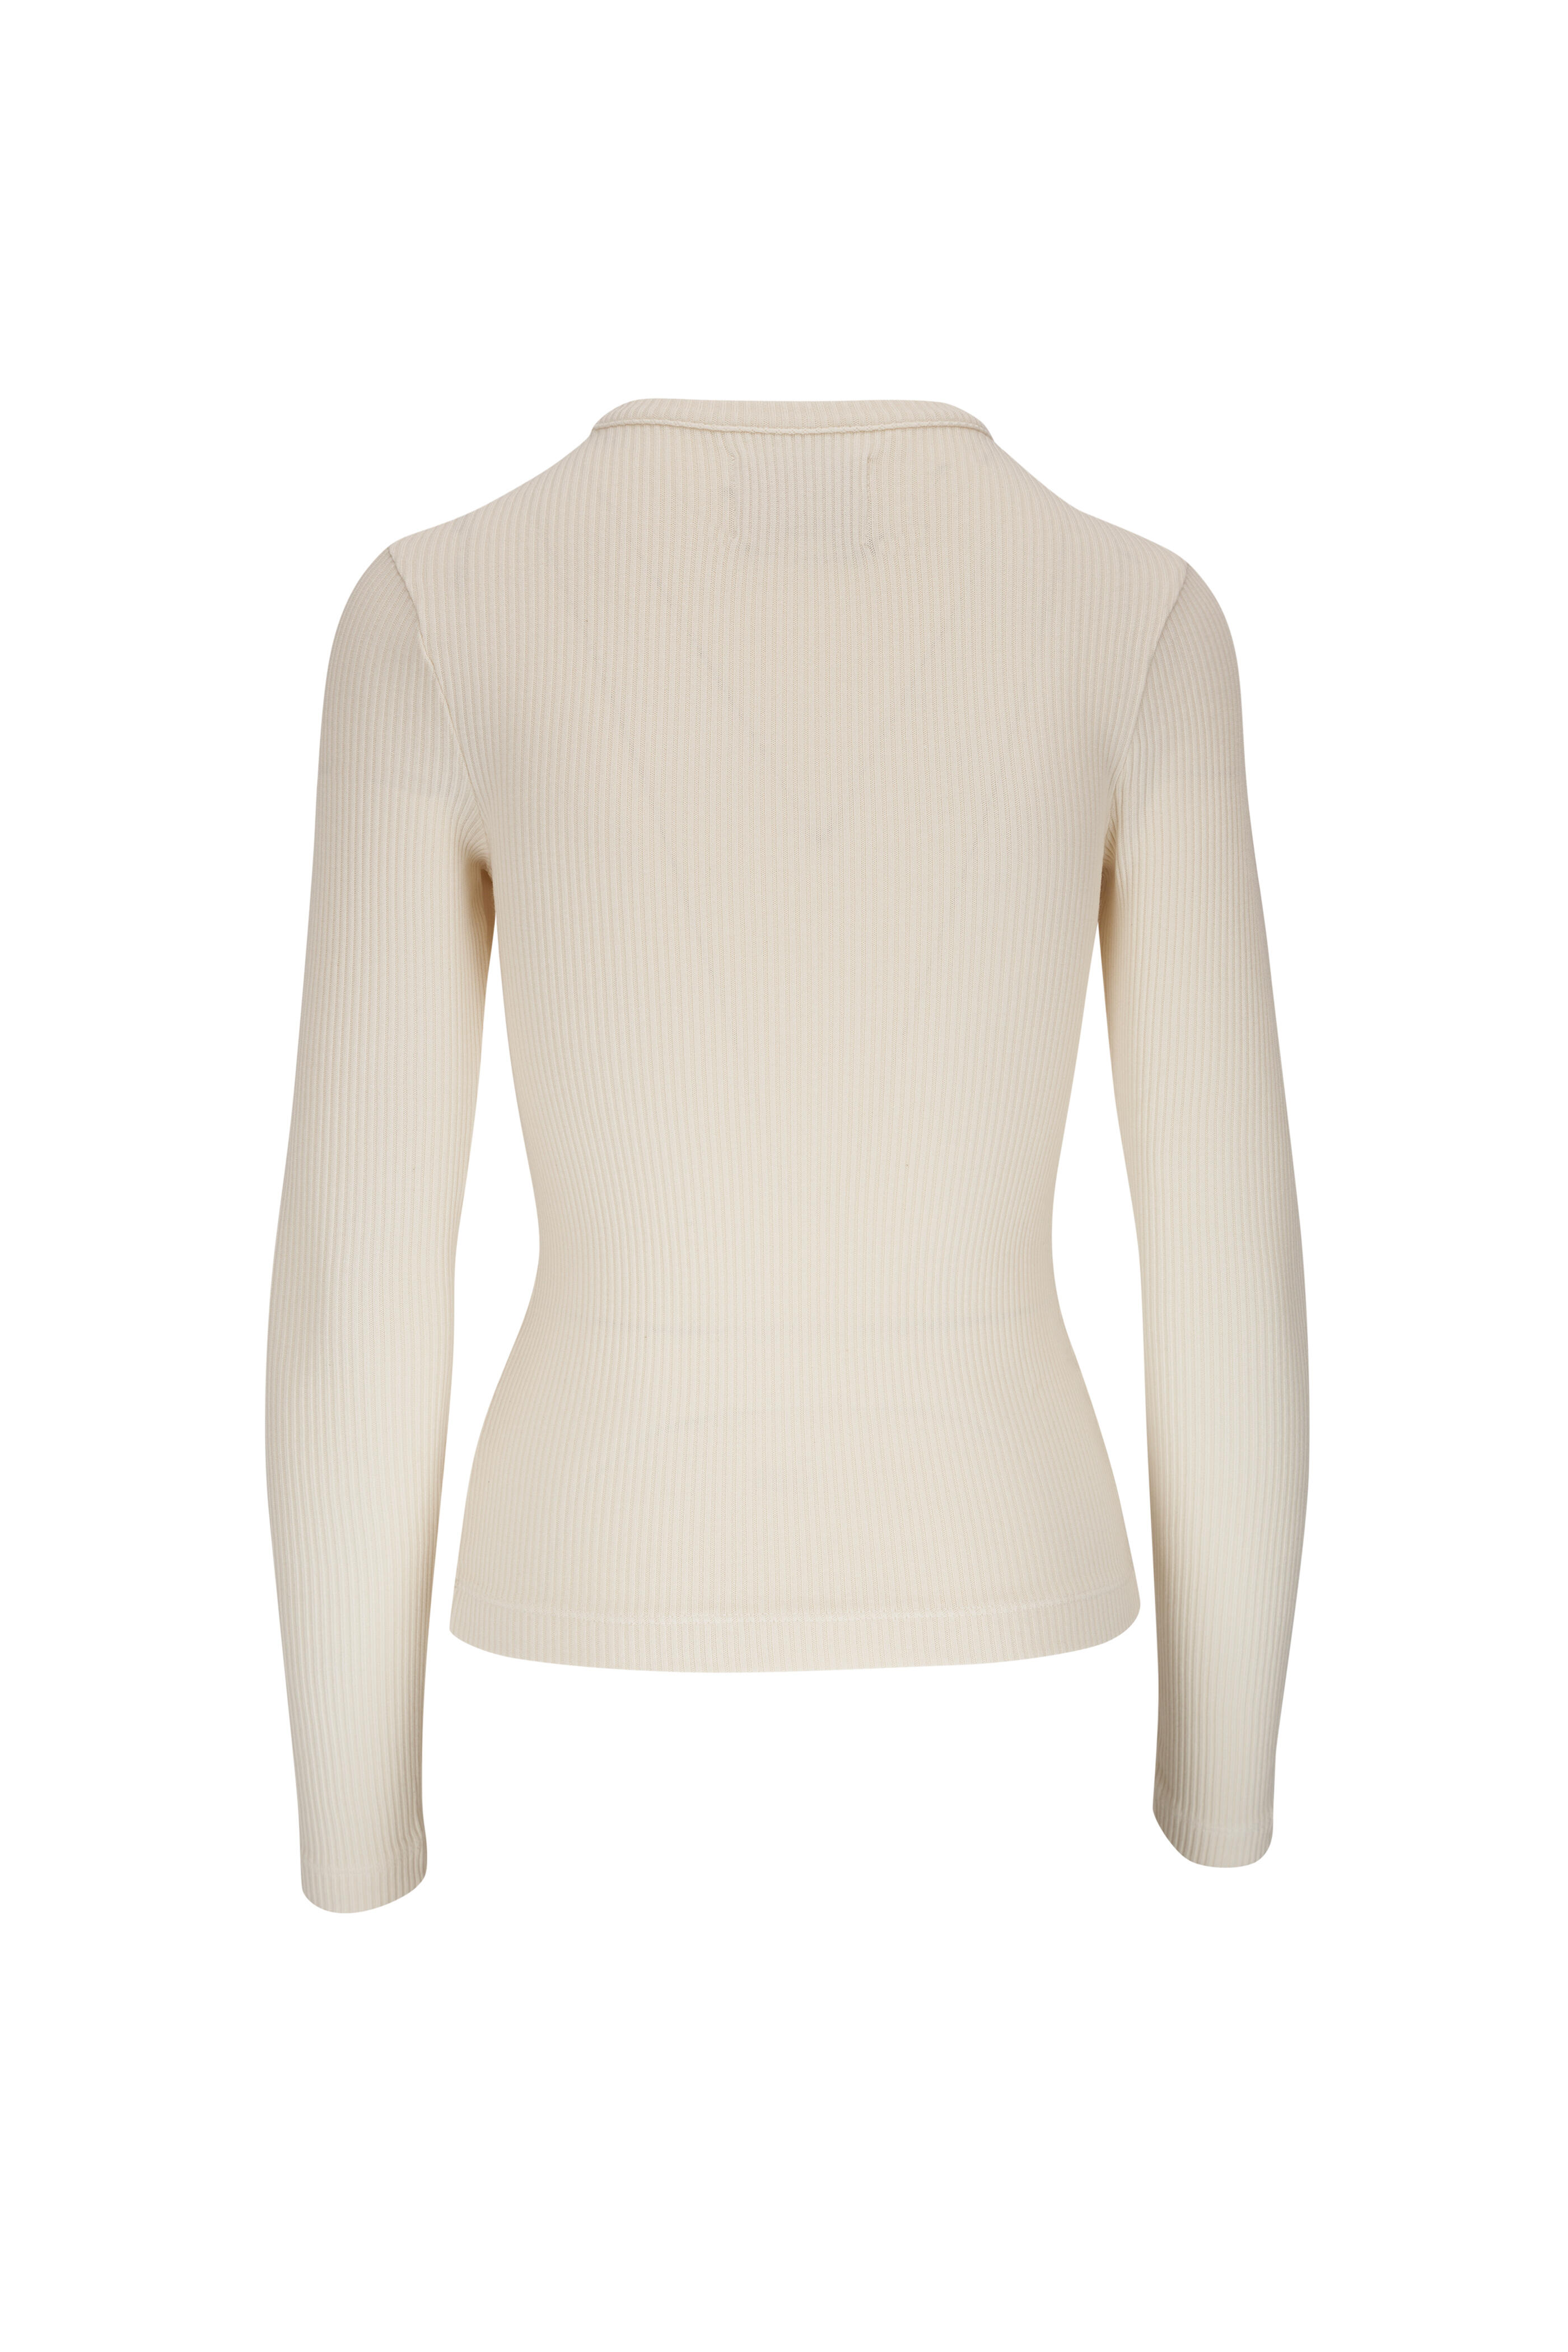 Citizens of Humanity - Bina Canvas White Ribbed Cotton Crewneck Top